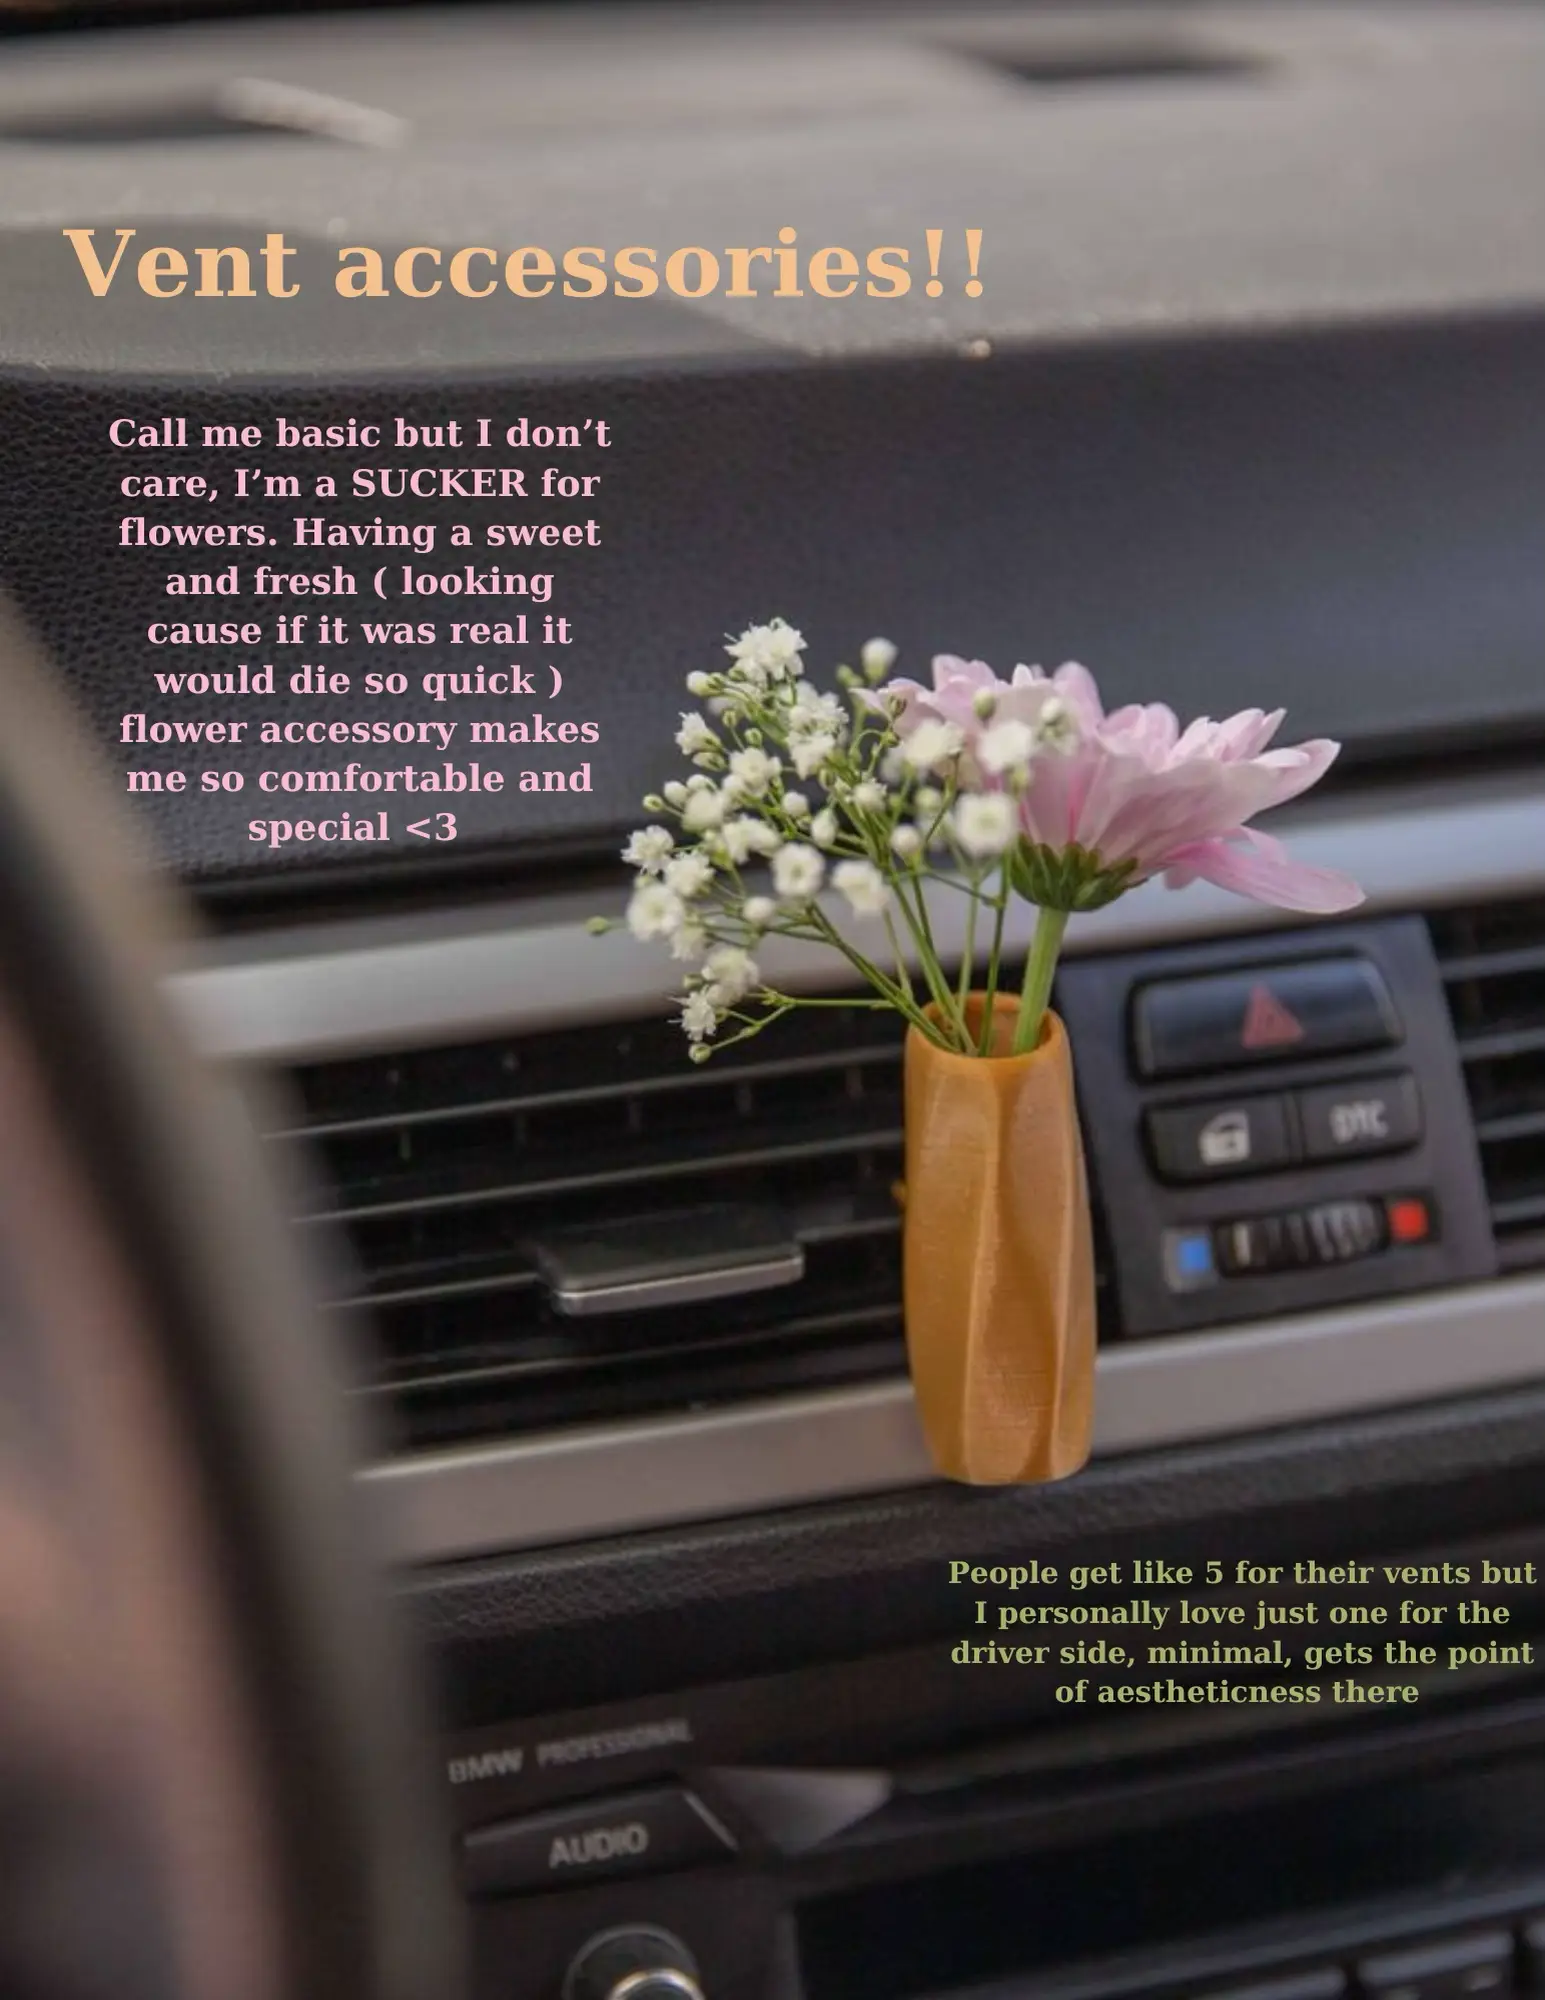 Cute Gifts Pink Car Decor Accessories for Women Teens, 6pcs Car Scent Air  Fresheners Vent Clips, Girly Daisy Flower Decorations Interior Aesthetic